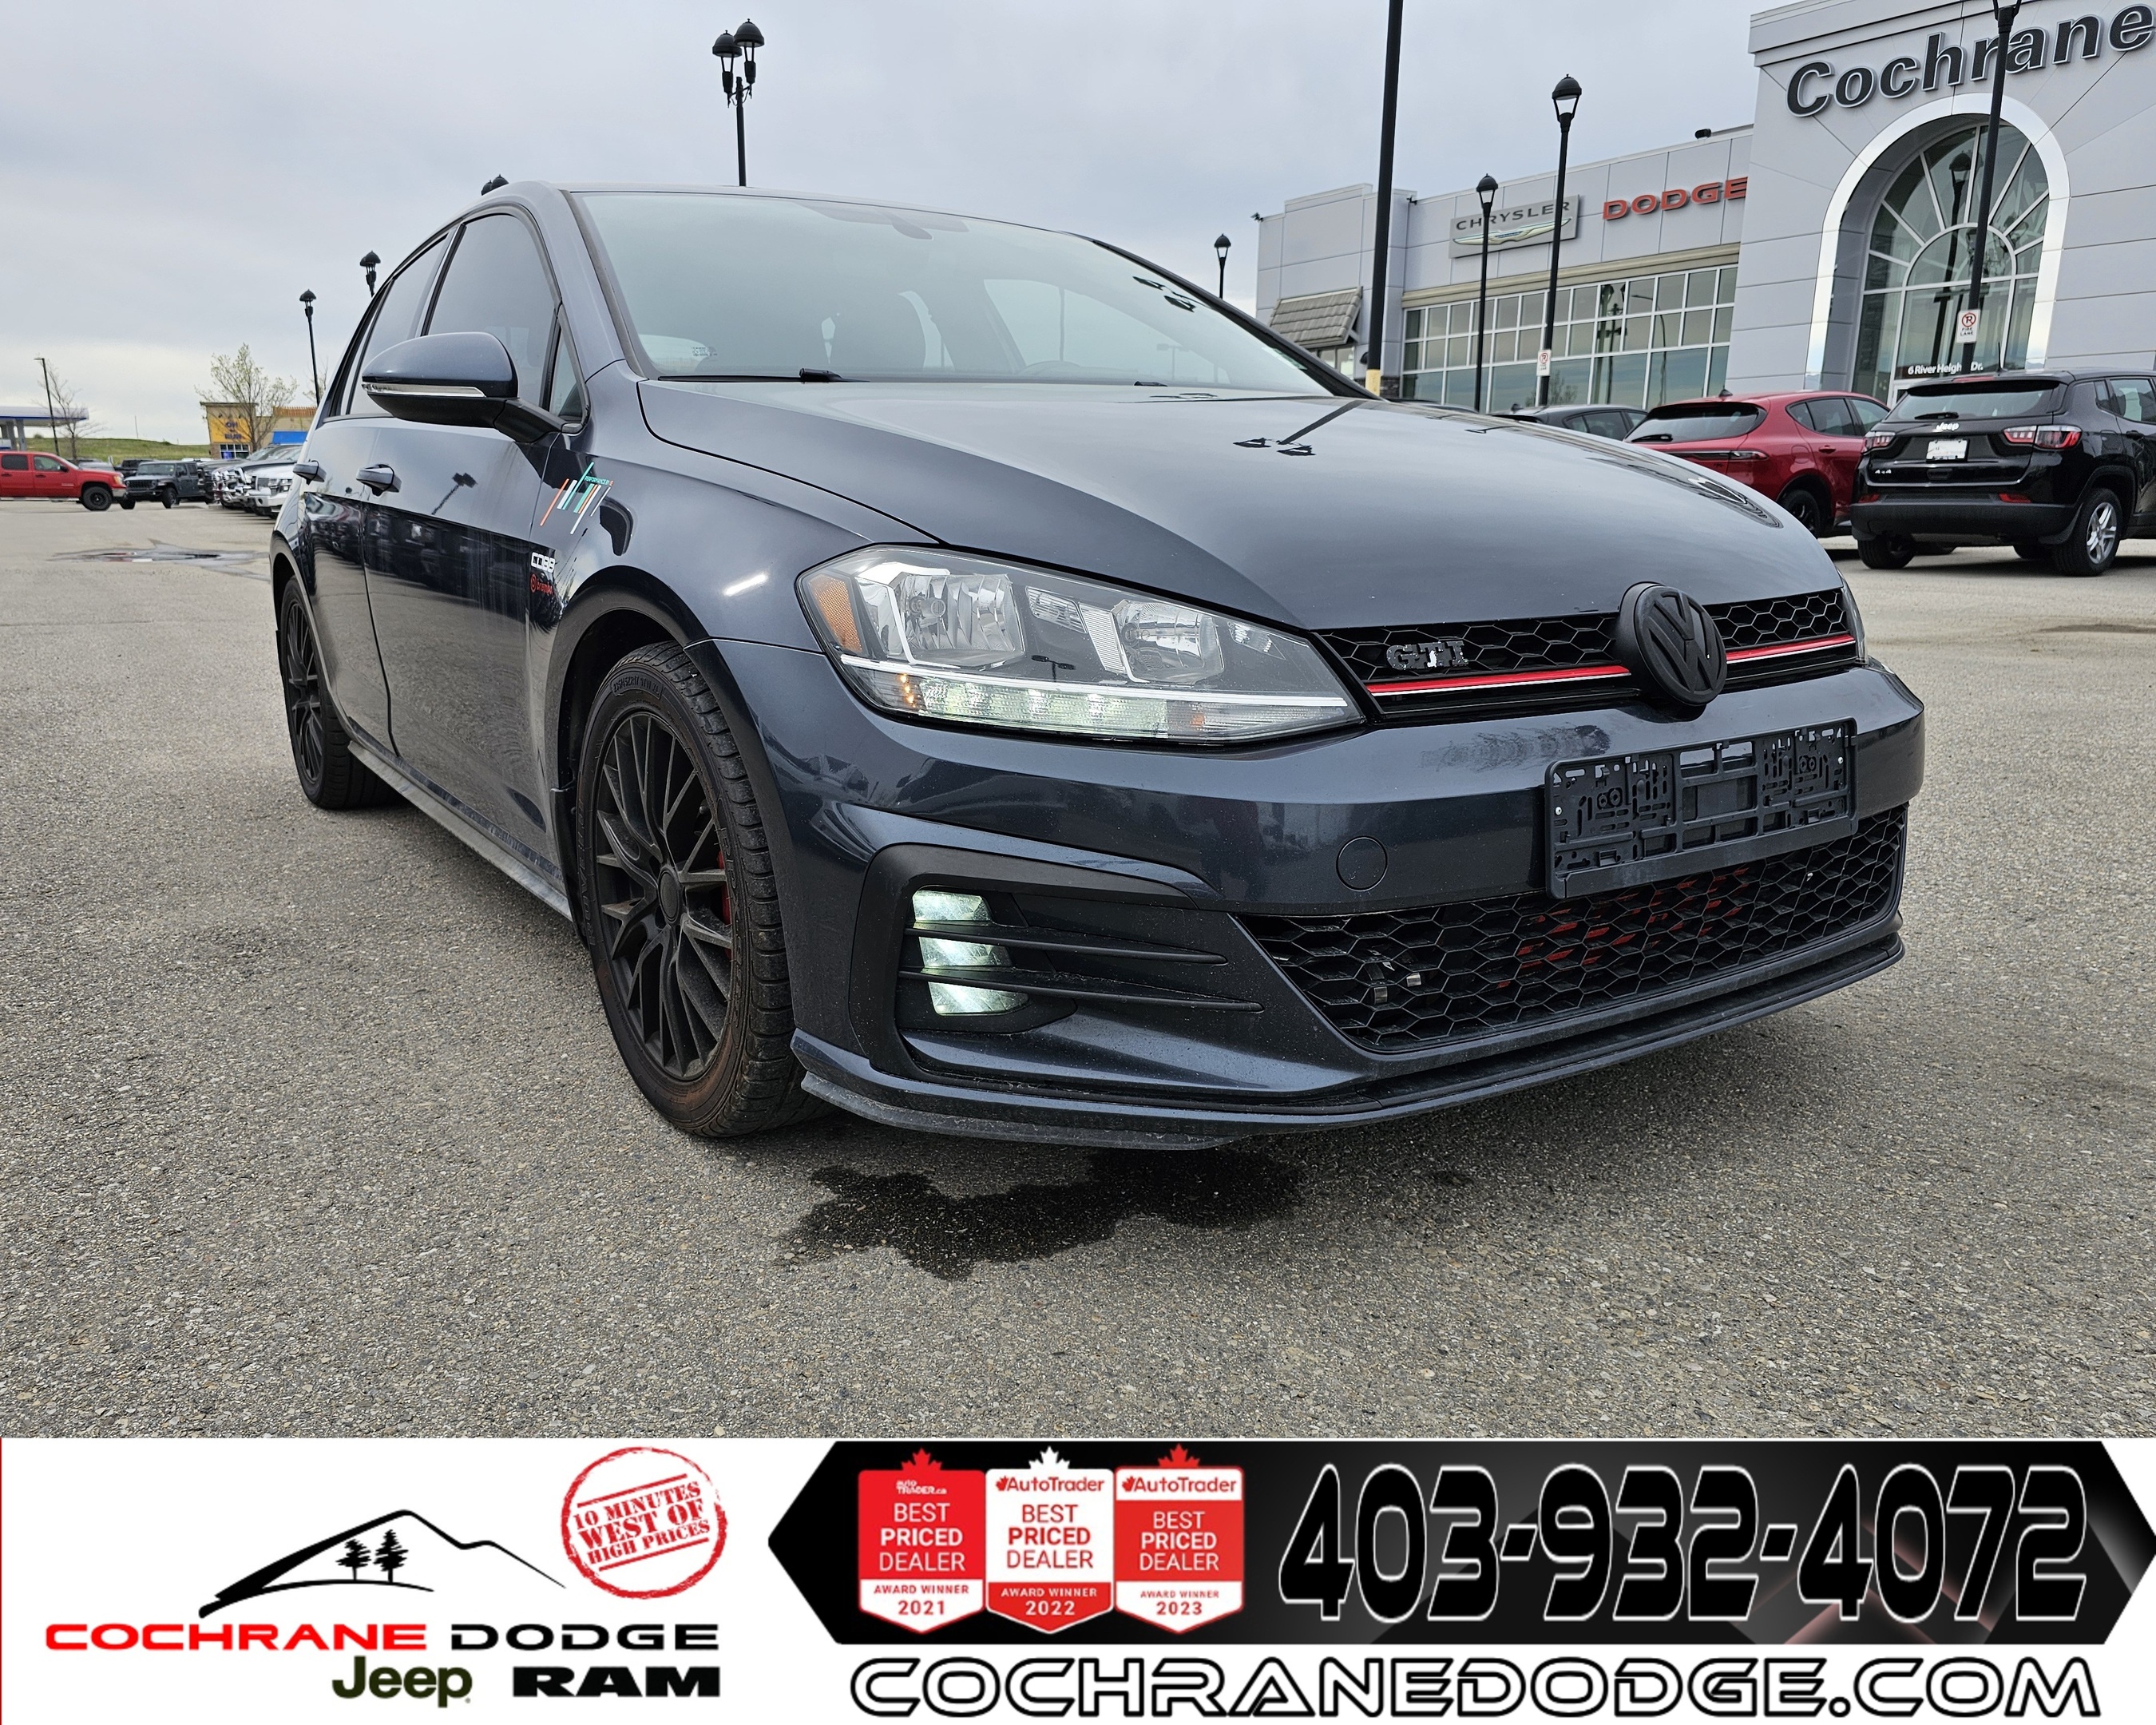 2018 Volkswagen Golf GTI R - Manual Transmission, Upgraded Turbo and more!